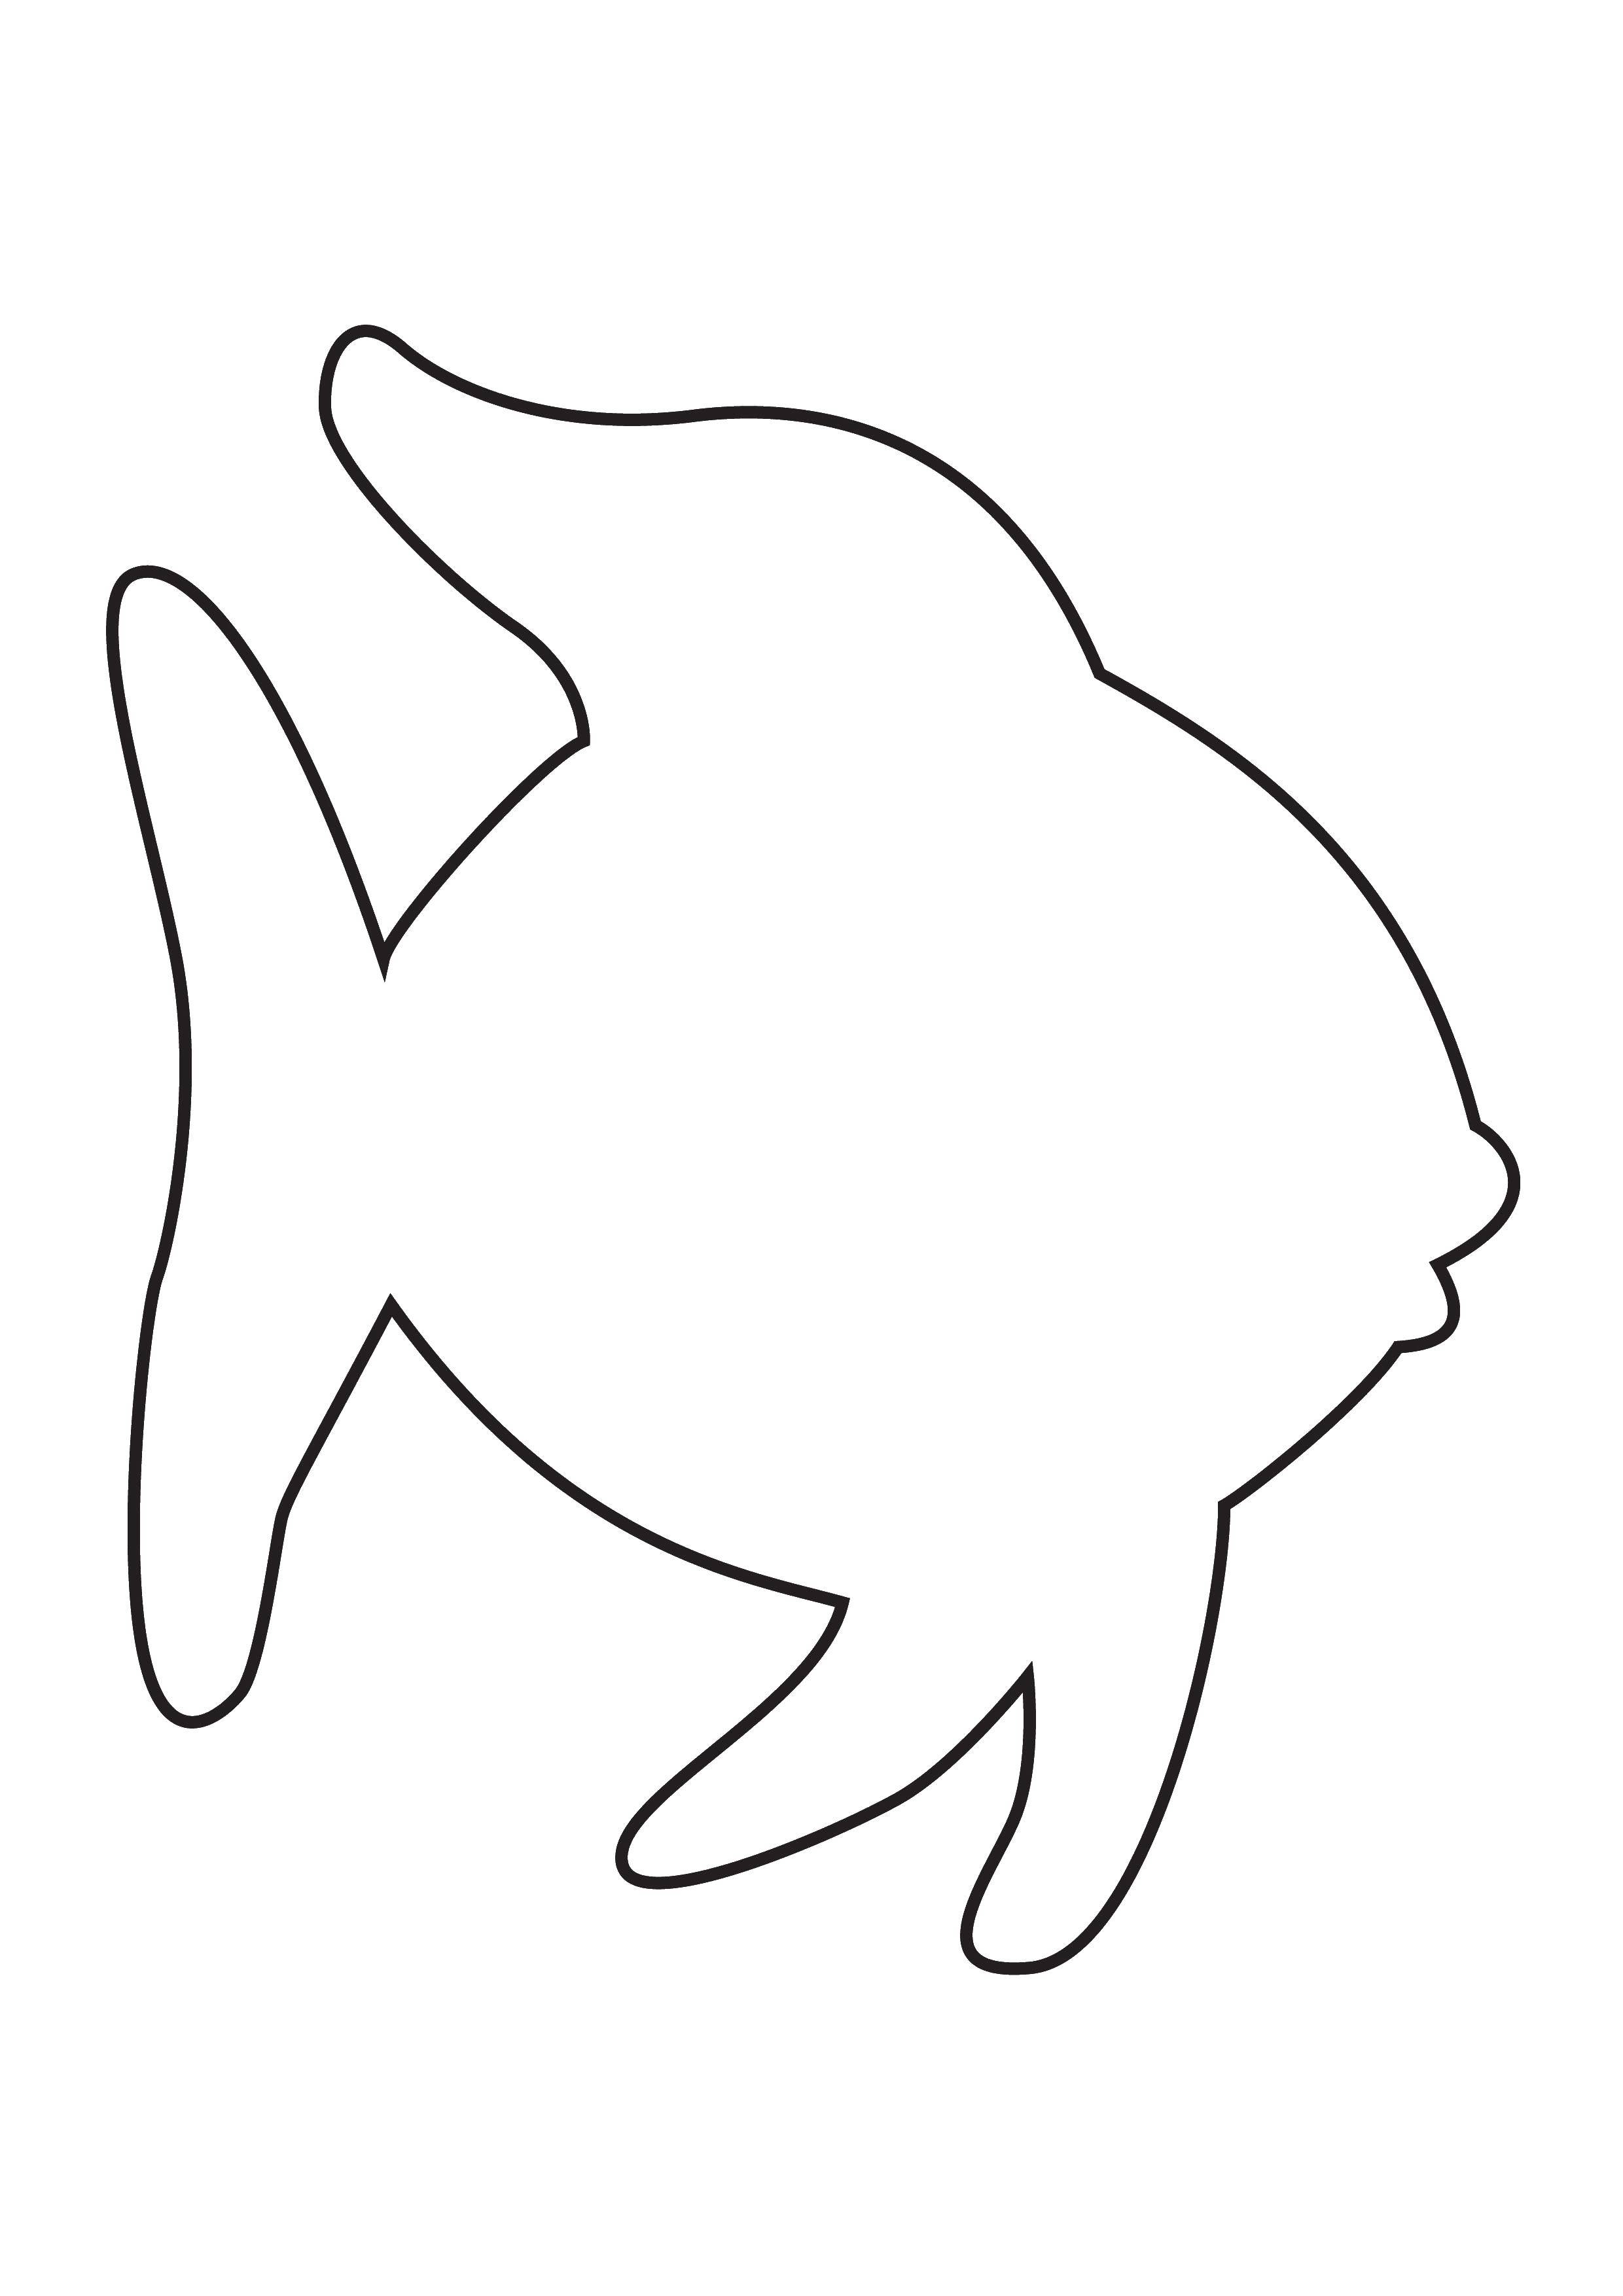 Coloring The contour of the fish. Category The contours of the fish to cut. Tags:  contours, fish, to cut.